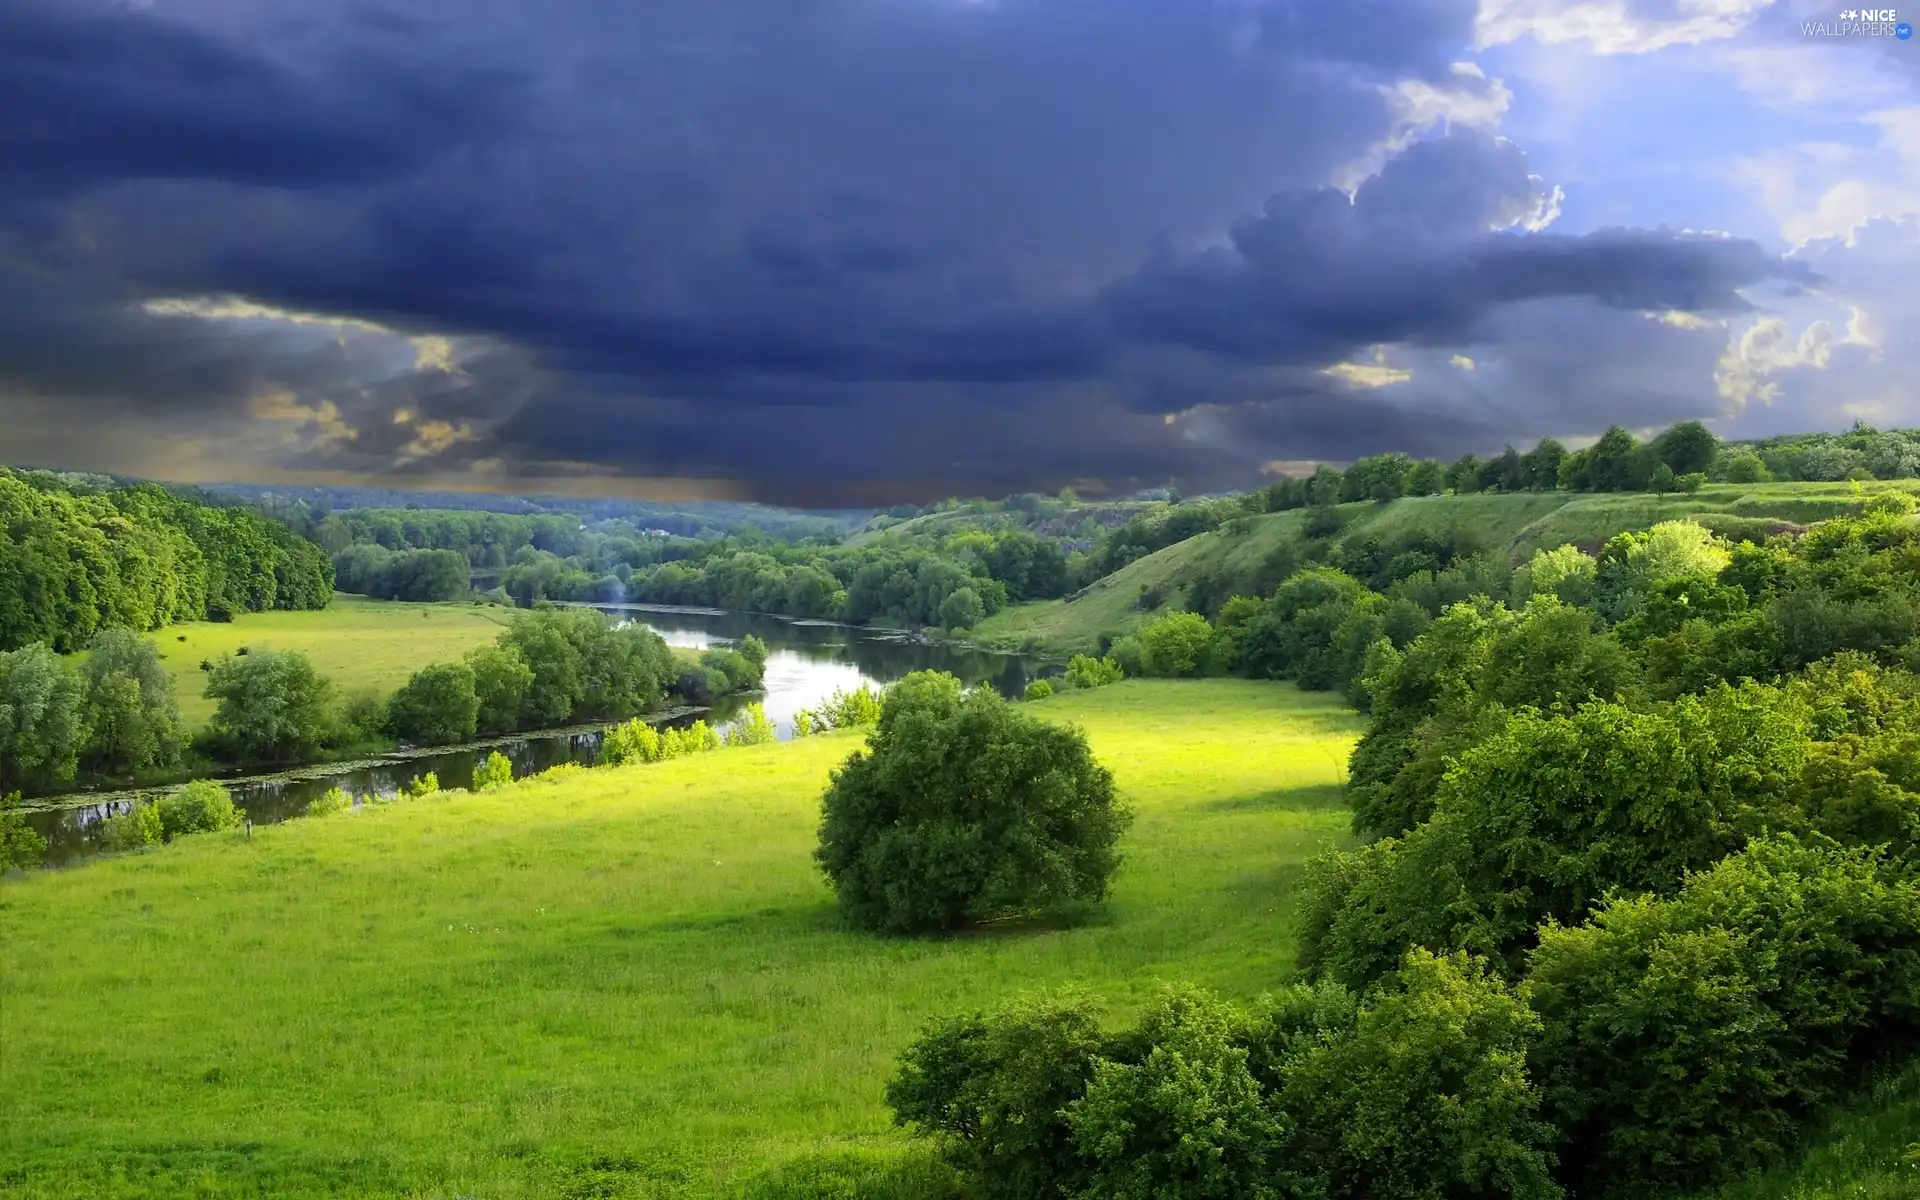 viewes, River, storm, Sky, Meadow, trees